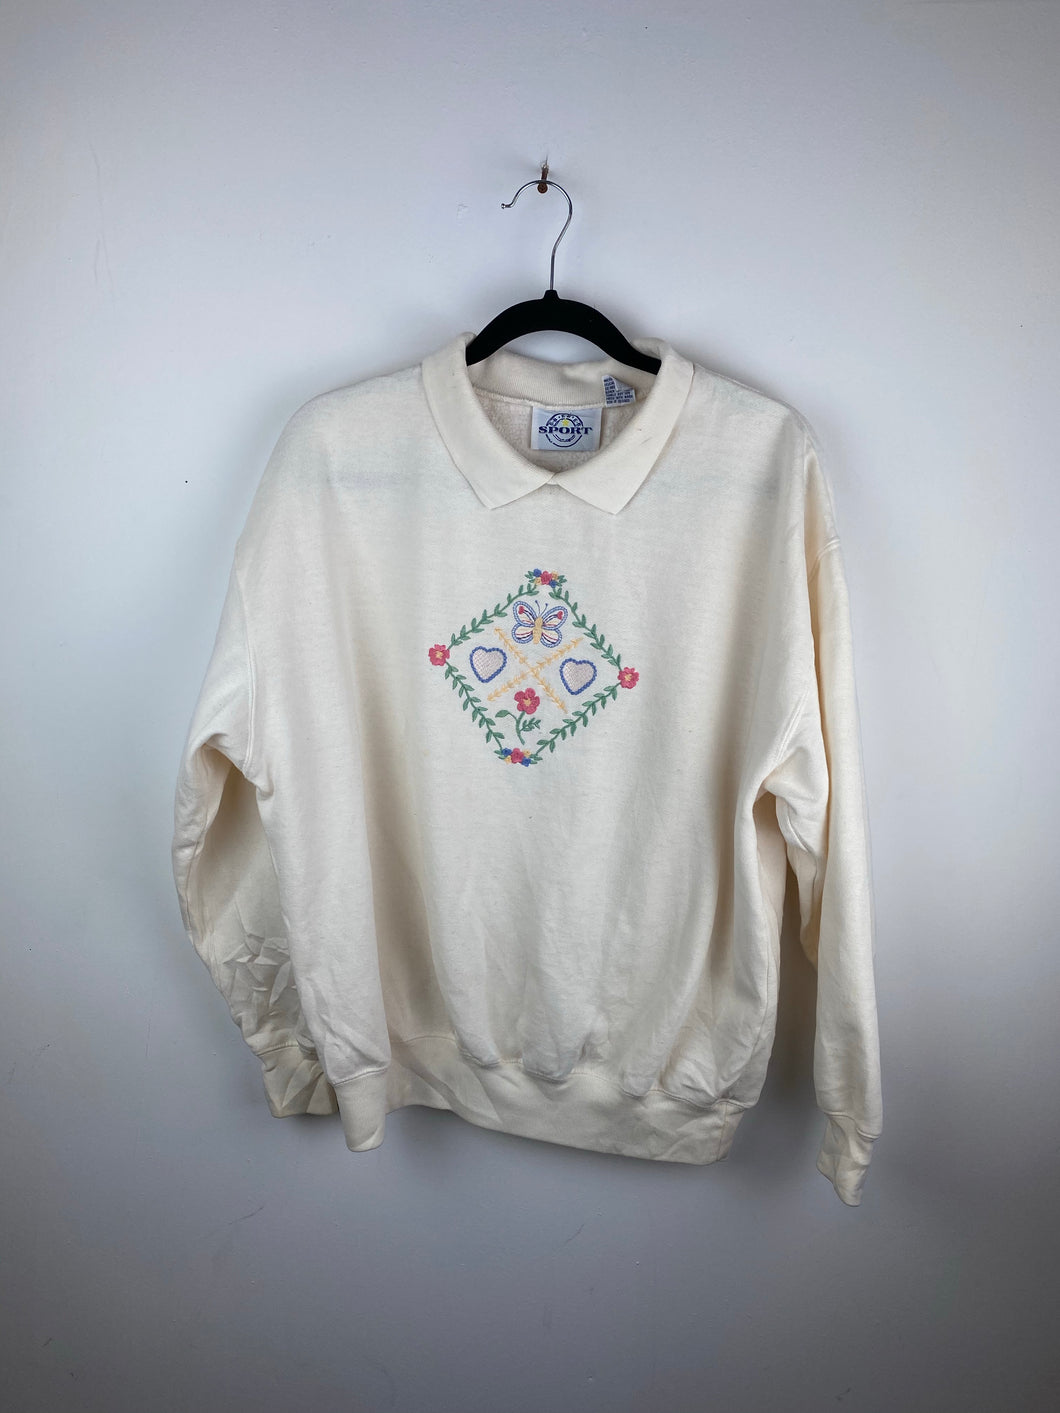 90s embroidered butterfly collared crewneck